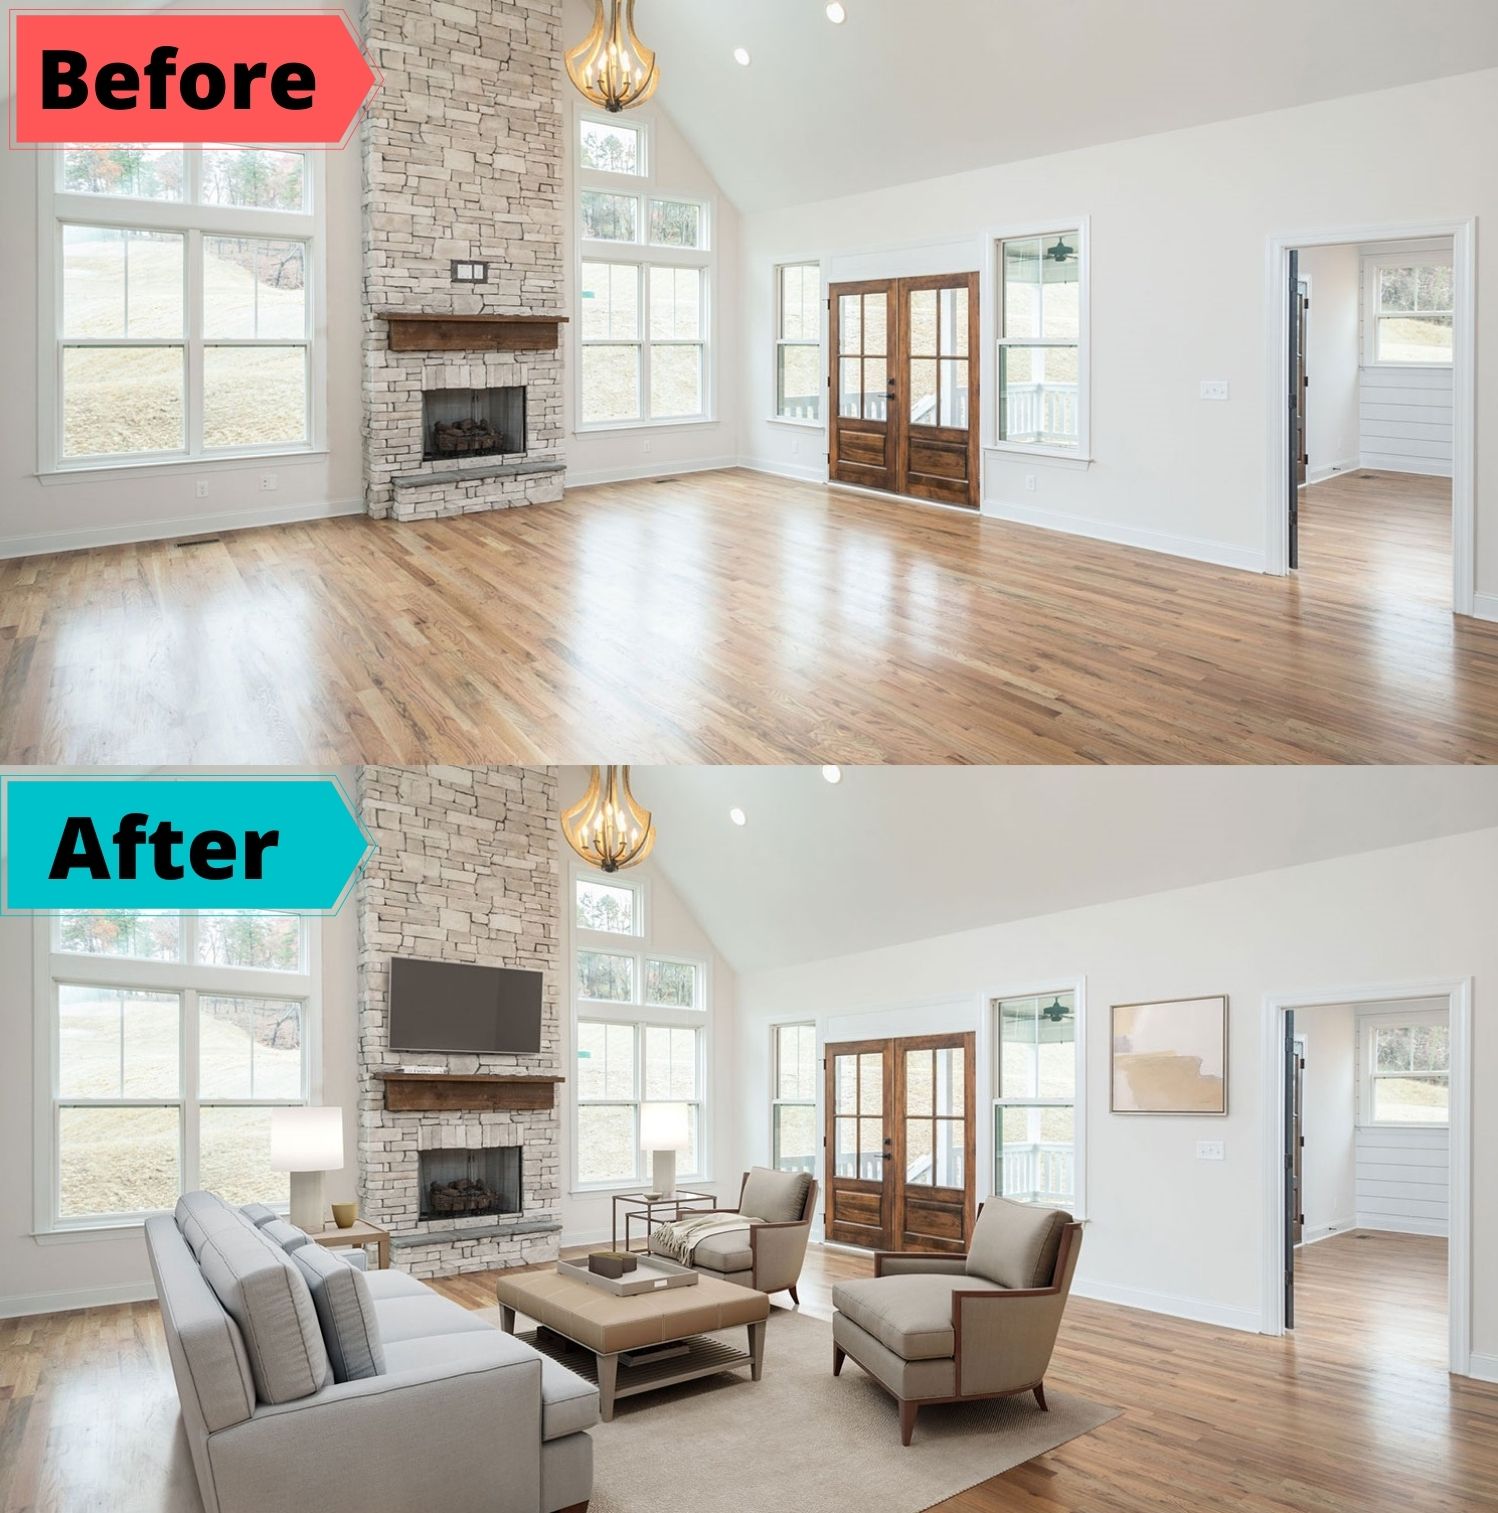 before and after home photos